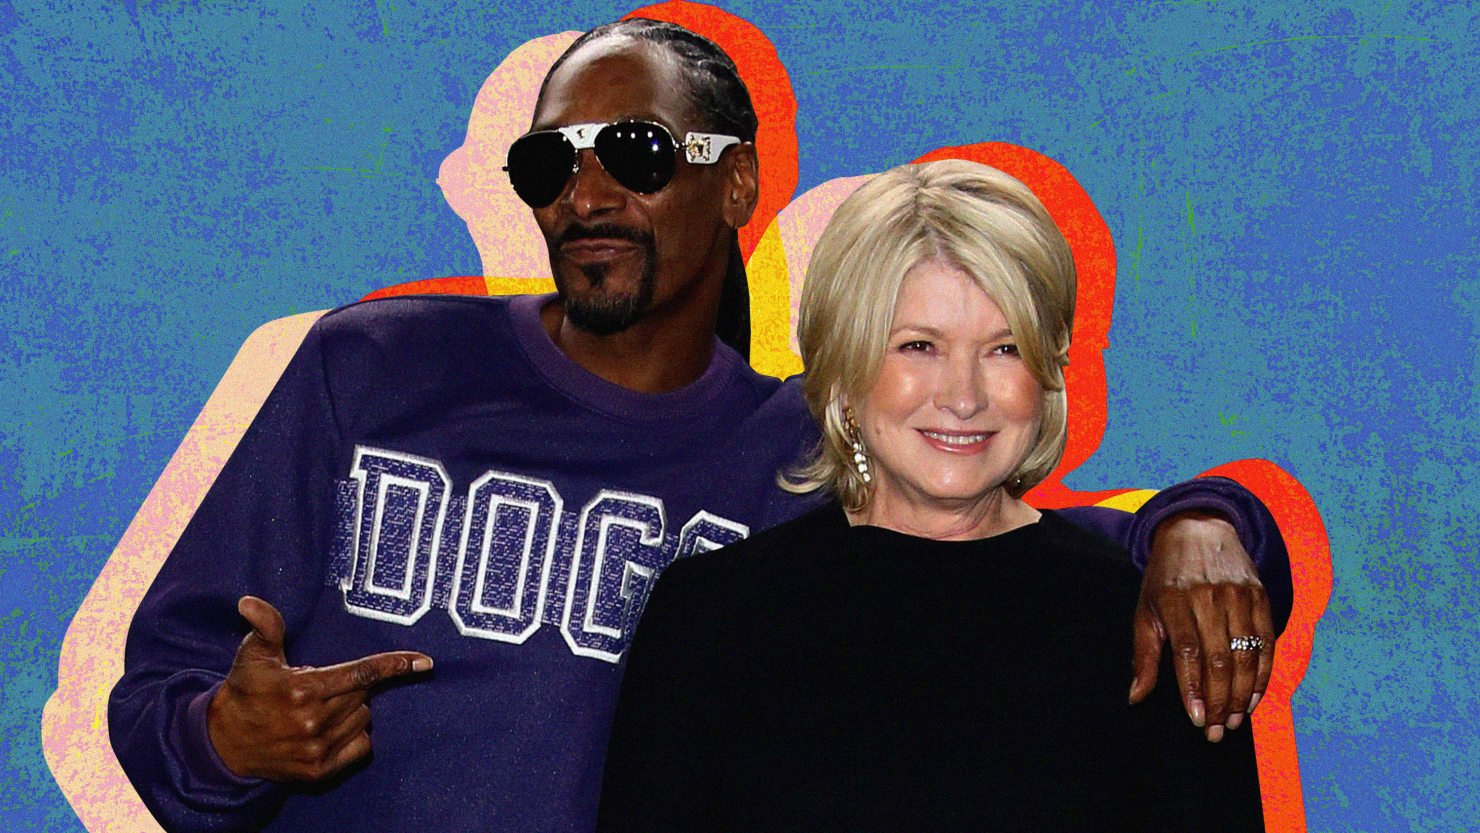 Snoop Dogg and Martha Stewart Dish on ‘Waking and Baking’ and Why Candy Corn Is Trash